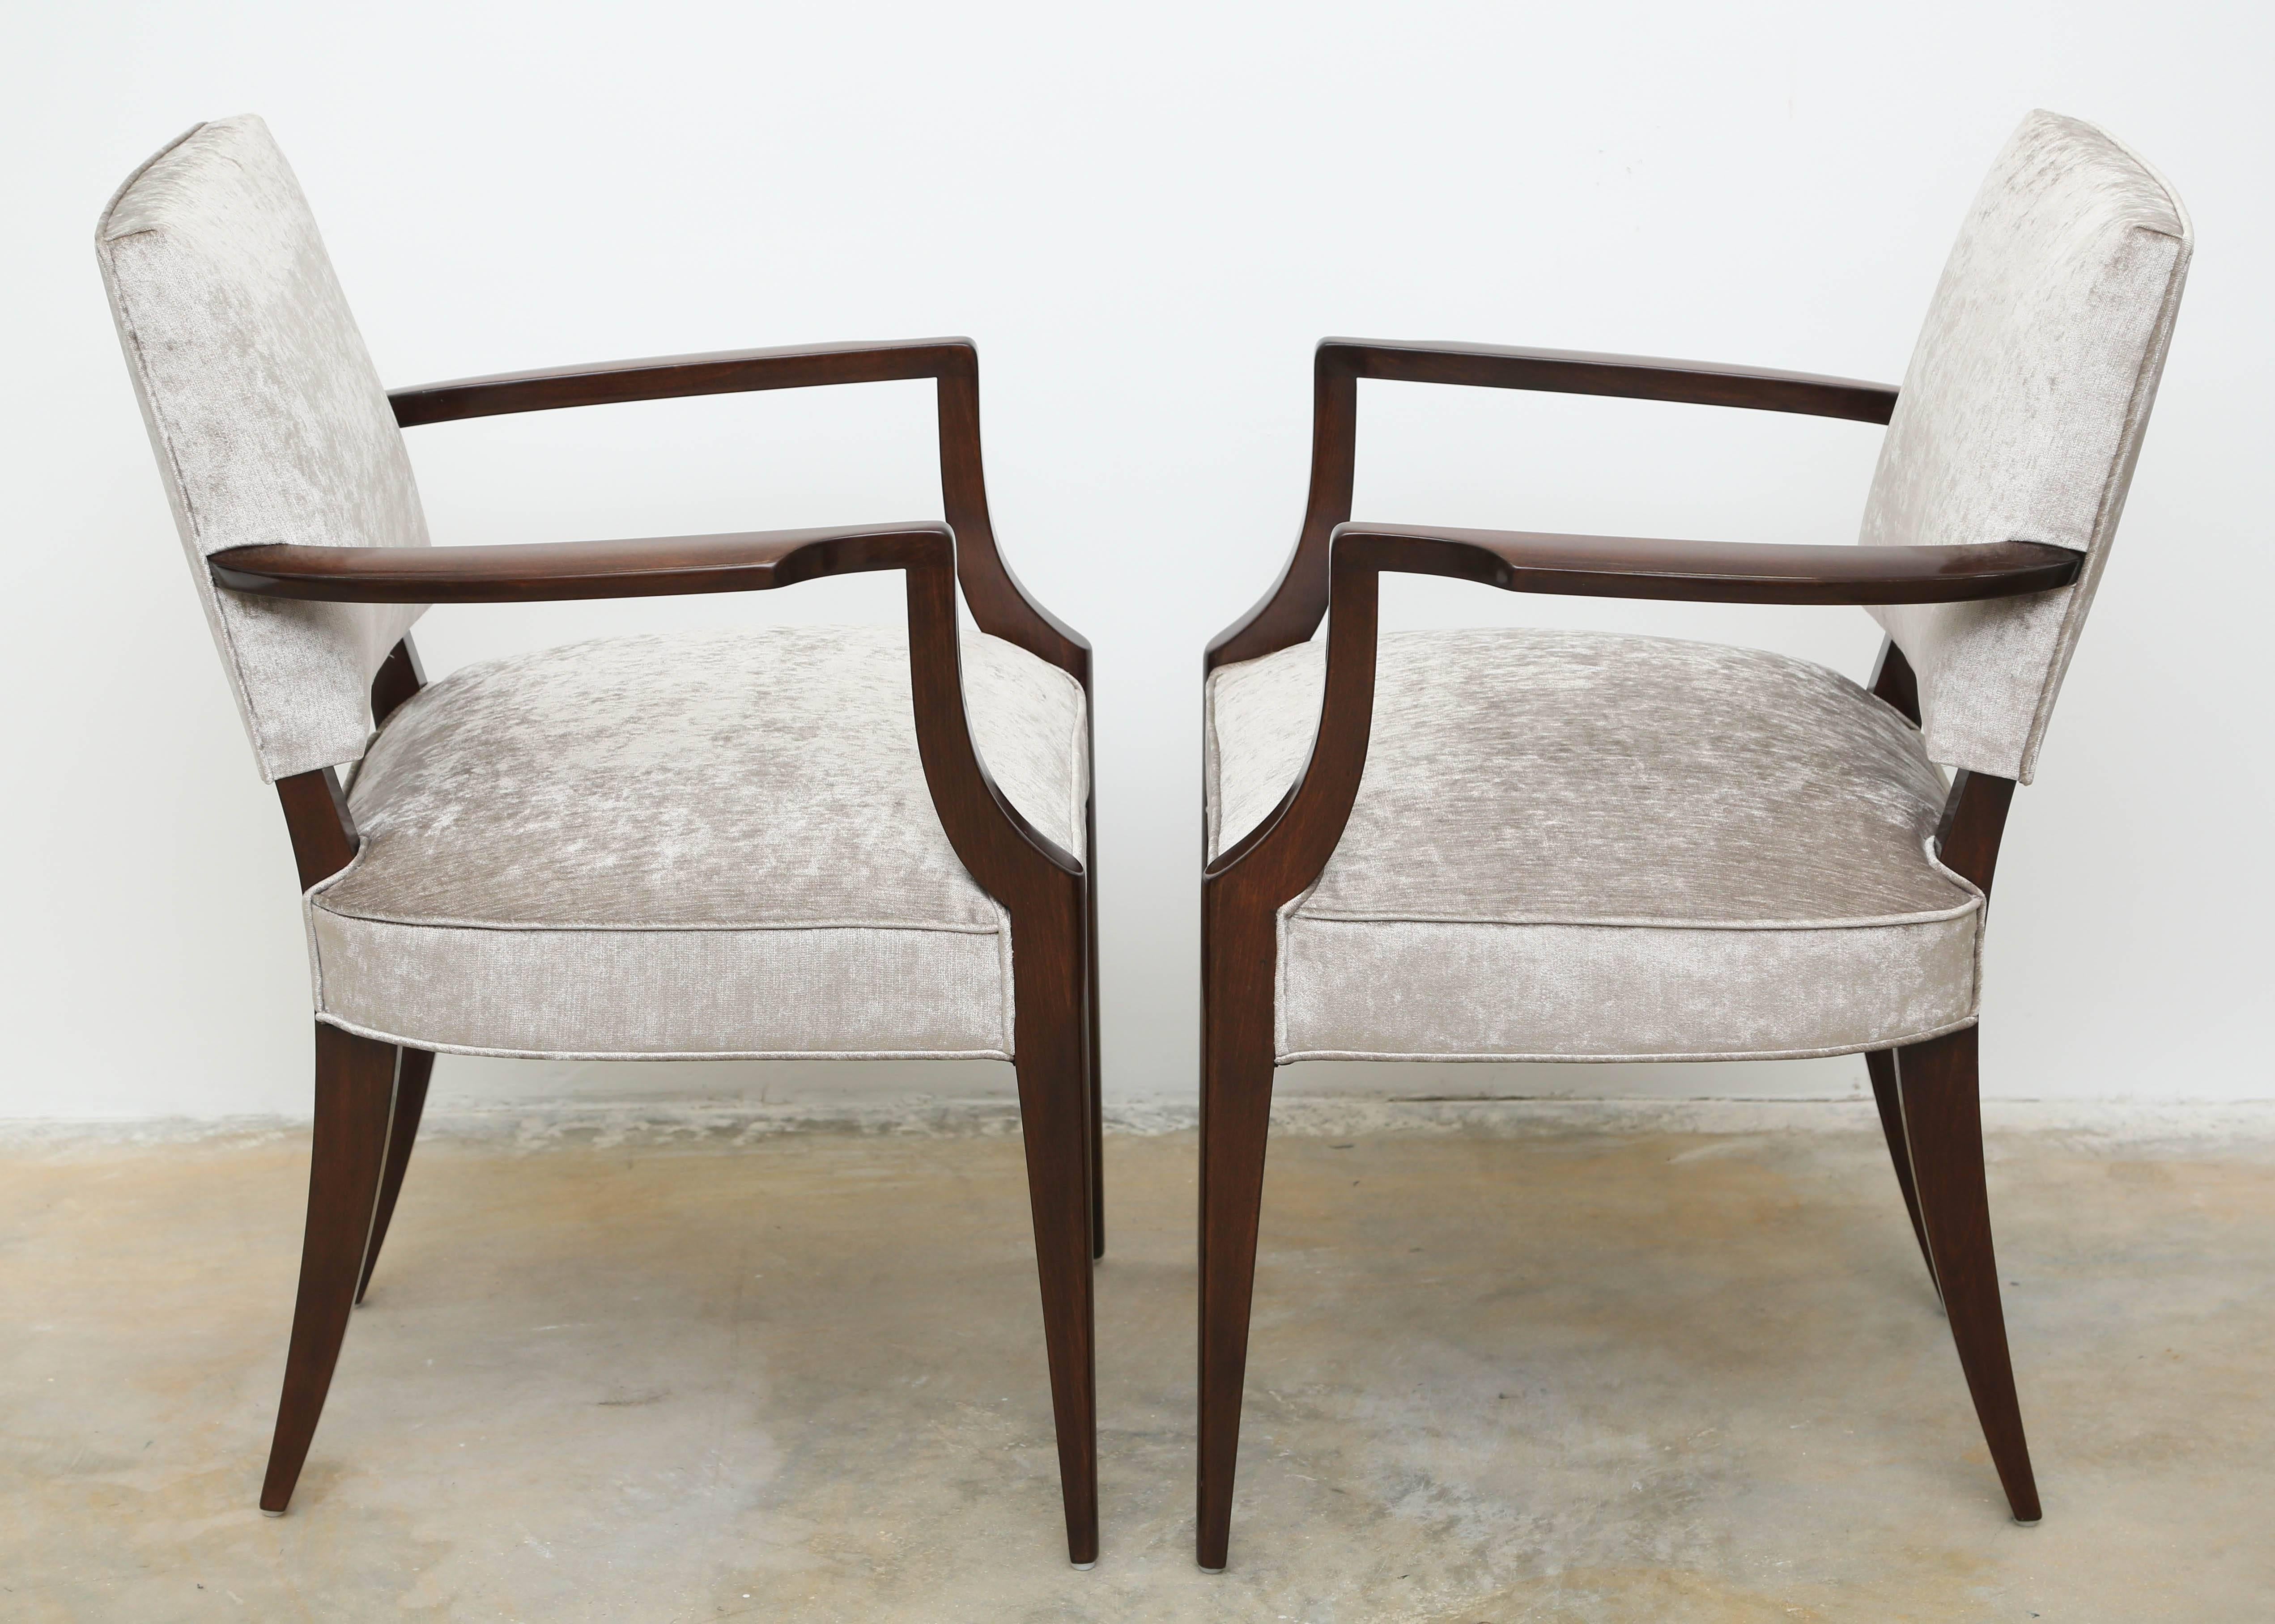 Elegant bridge armchairs in beech, re-upholstered in chic silver-grey velvet.
Jules Leleu style.
Very comfortable and stylish.
Frames in excellent condition, recently refinished.